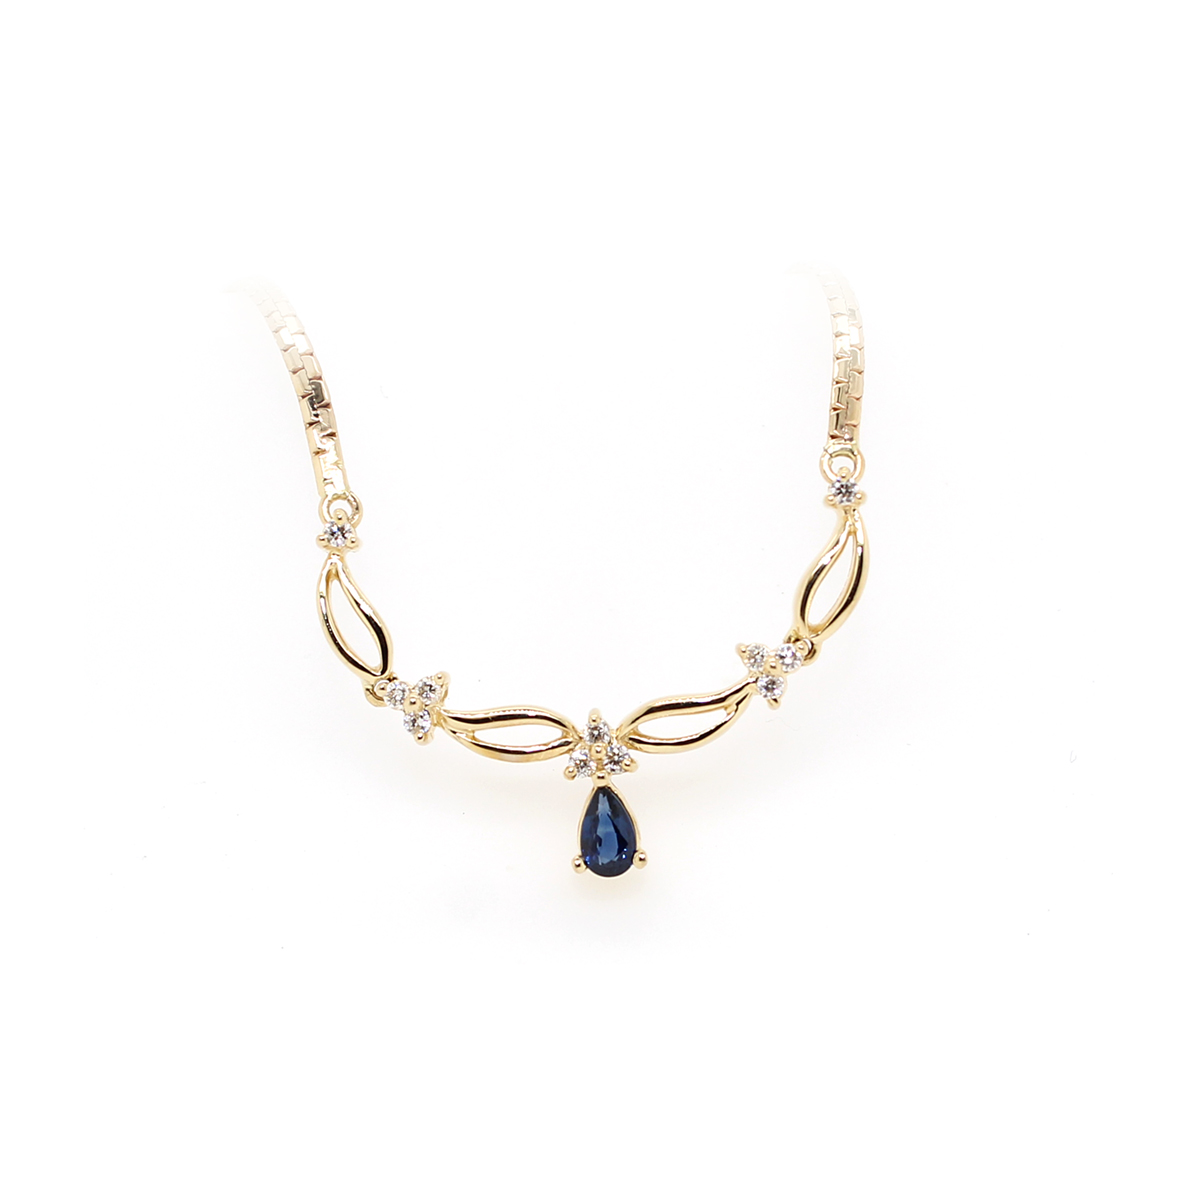 Estate 14 karat yellow gold Blue sapphire and diamond necklace having a flat fox tail chain  measuring 16.5" The necklace has a center section containing a pear shaped sapphire prong set  having three stations each having three full cut prong set diamonds